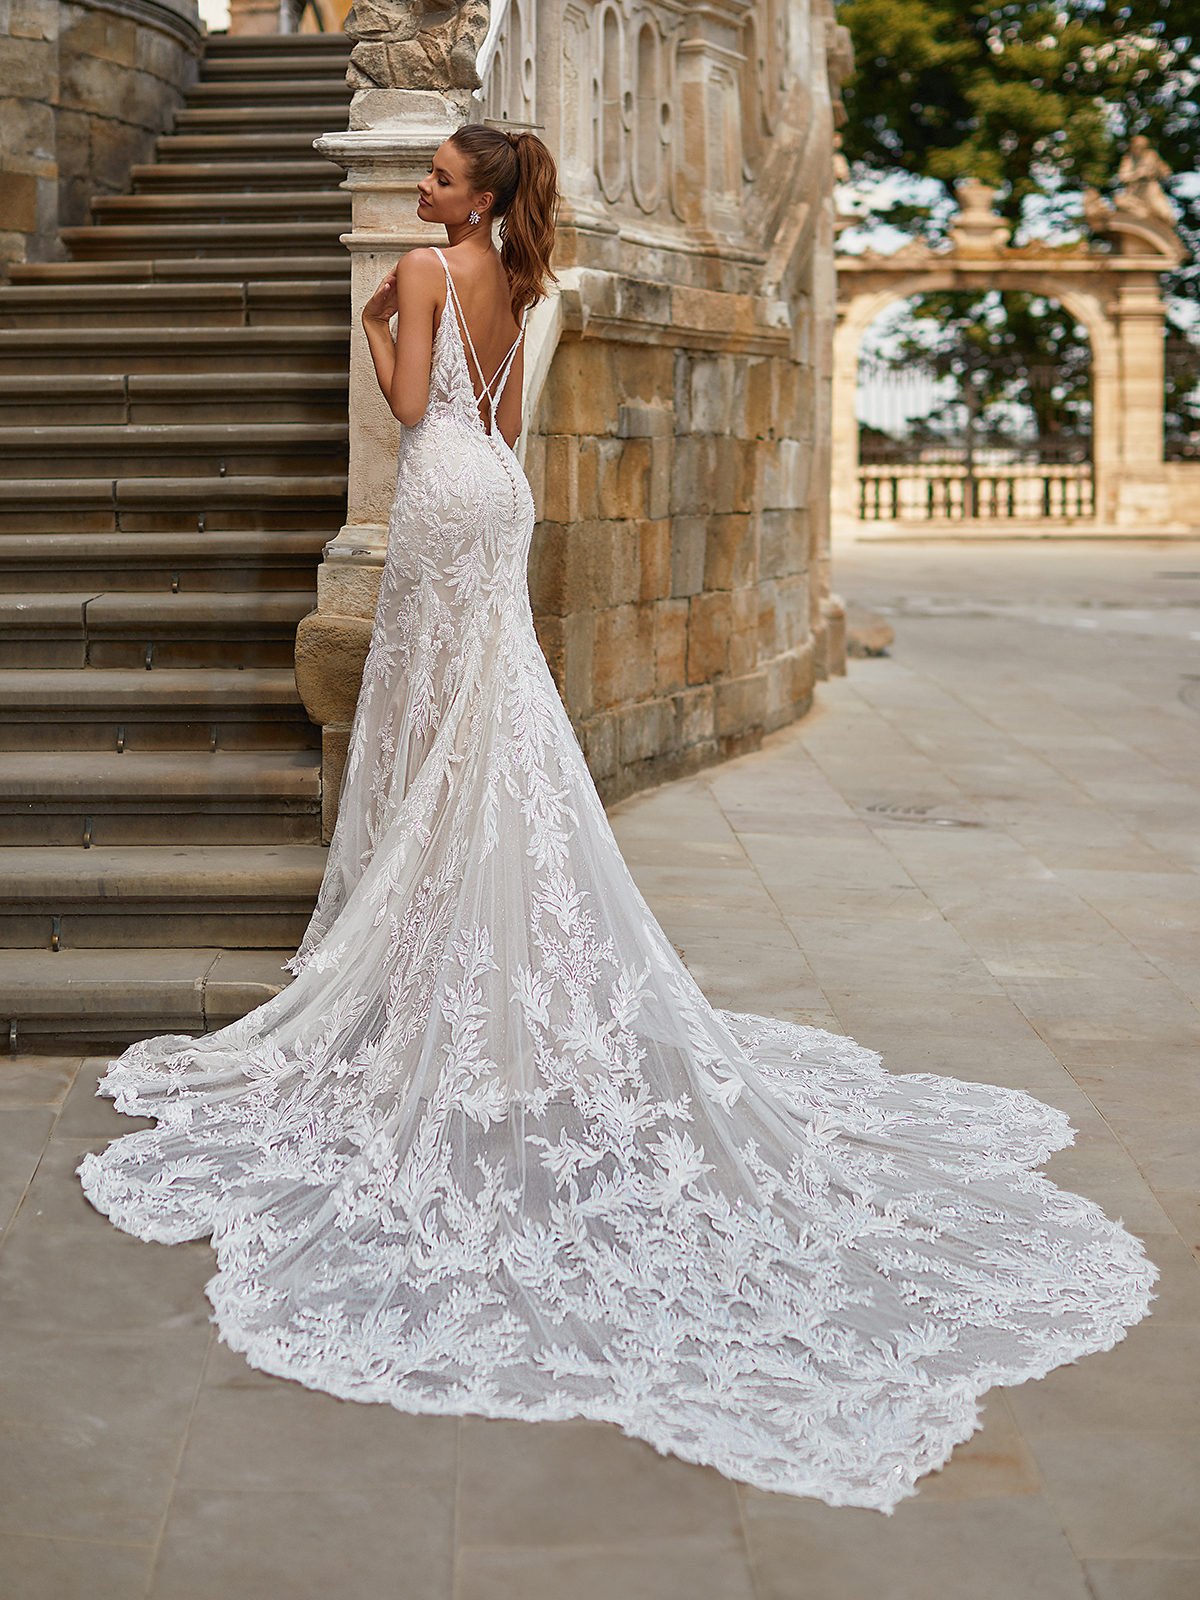 Balancing Tradition and Innovation in Low Back Lace Wedding Dress